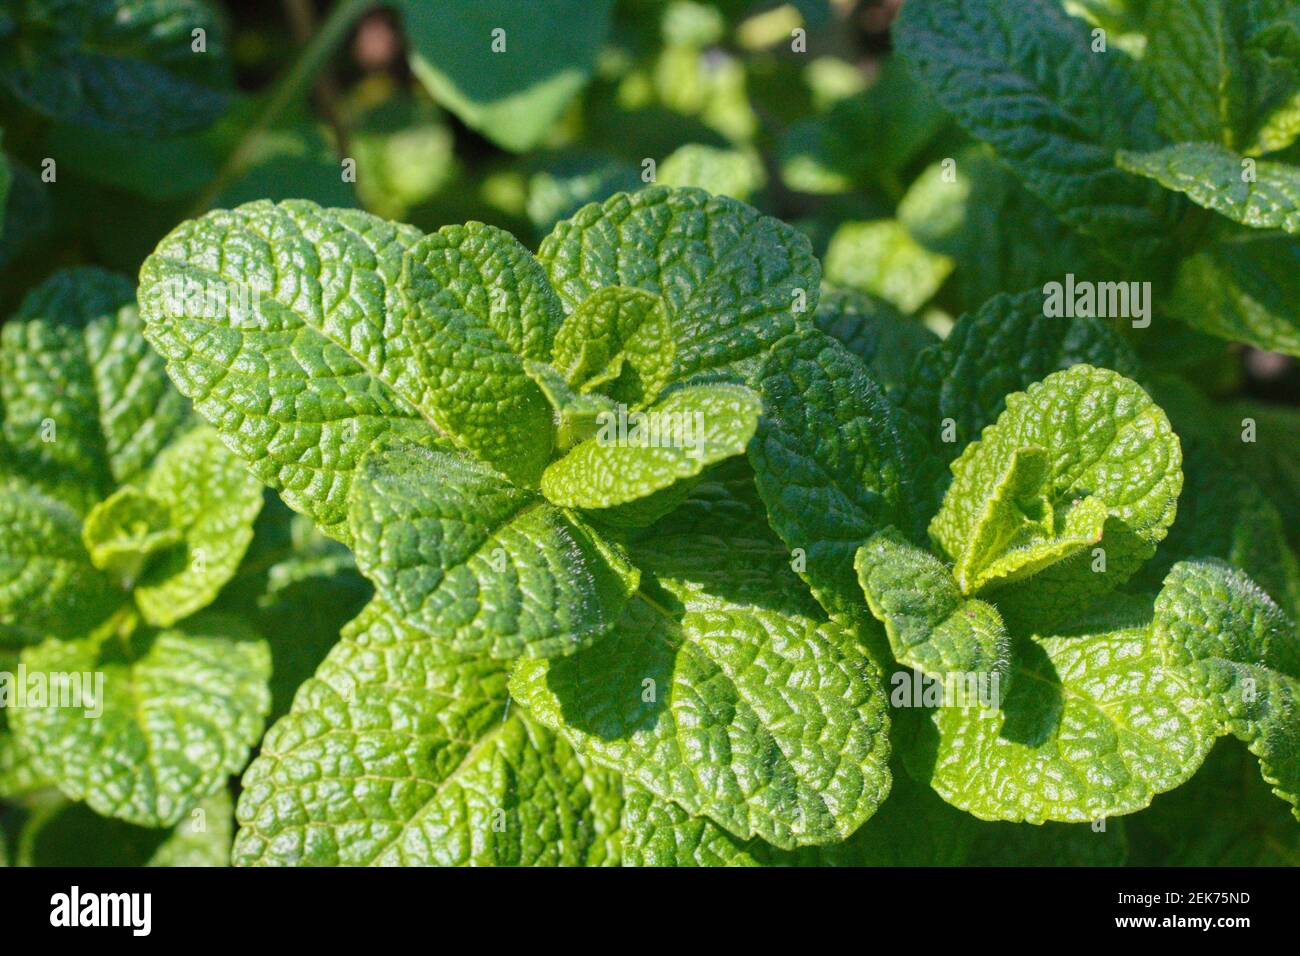 peppermint plant, Mentha spicata, organically grown for aromatherapy and homeopathy natural medicine Stock Photo